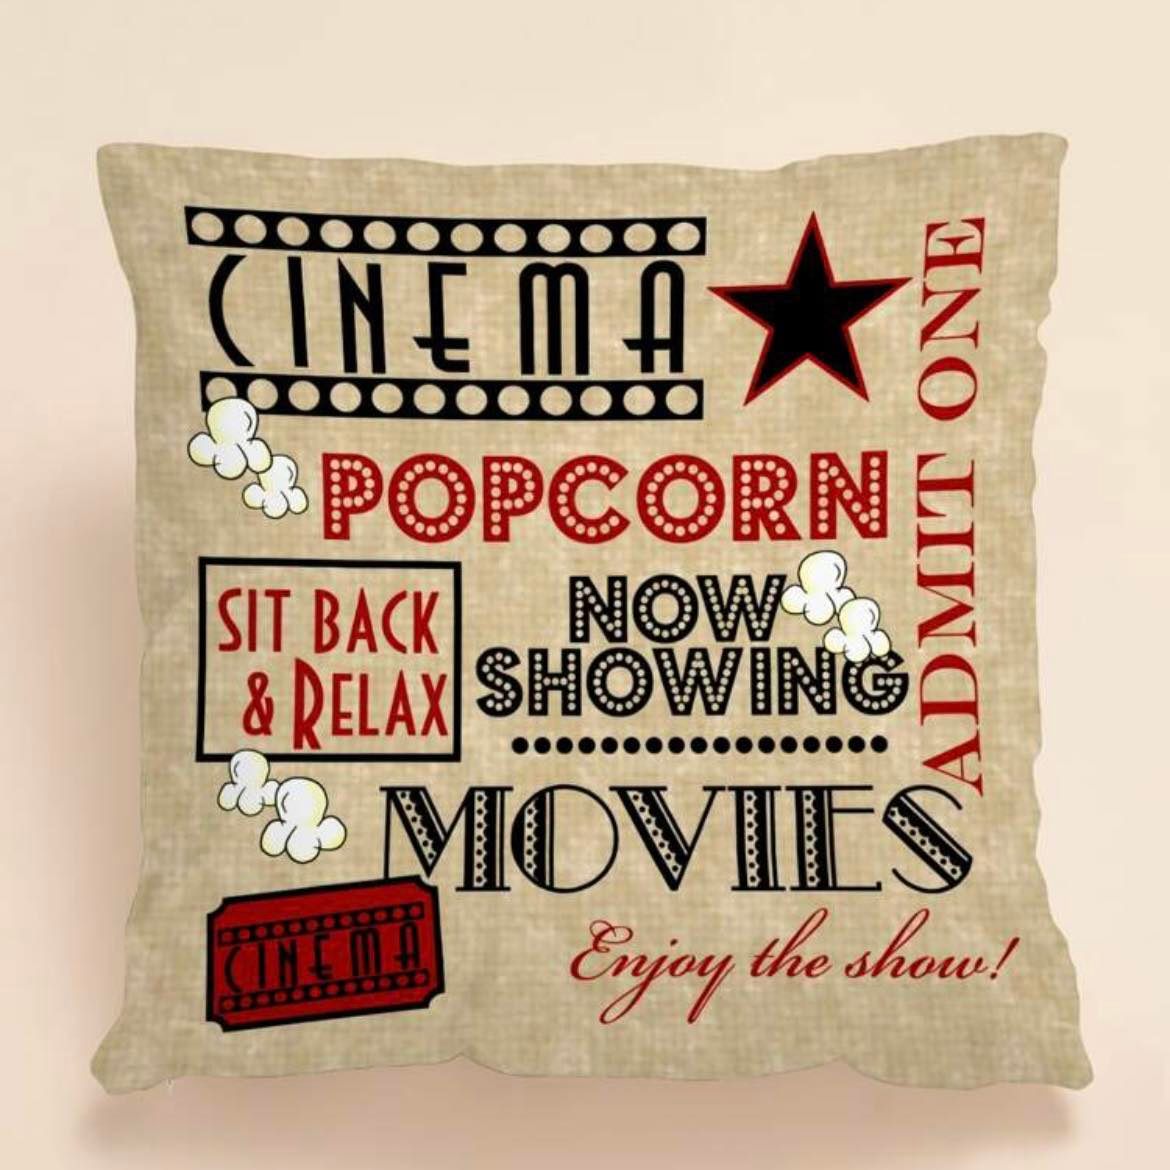 "At the Movies" Throw Pillow Cover